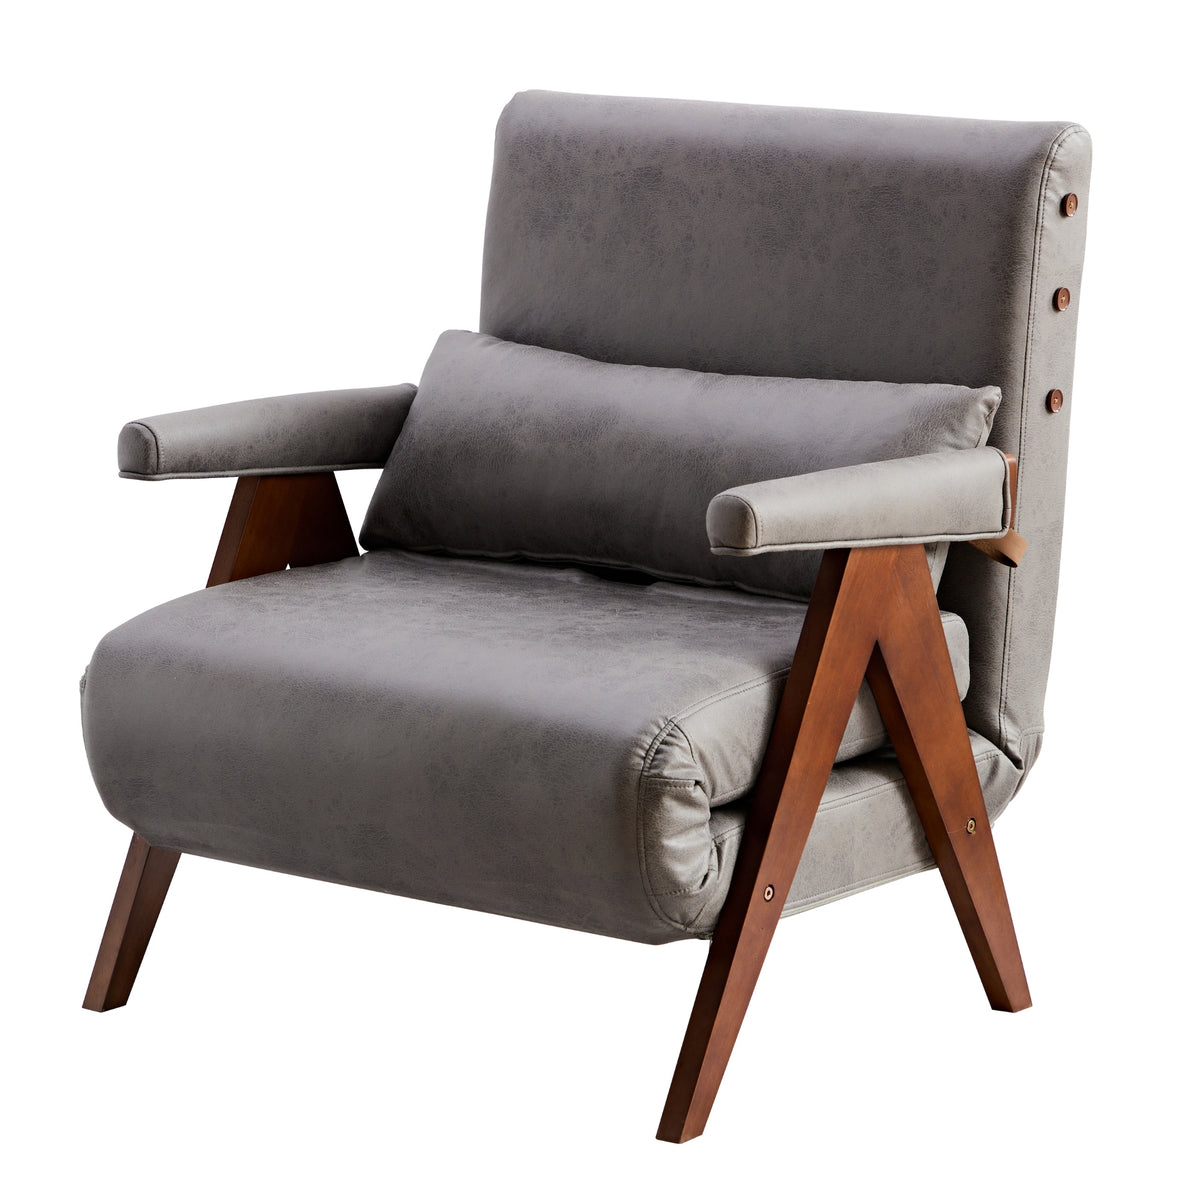 Gray chair with wooden legs and cushion.